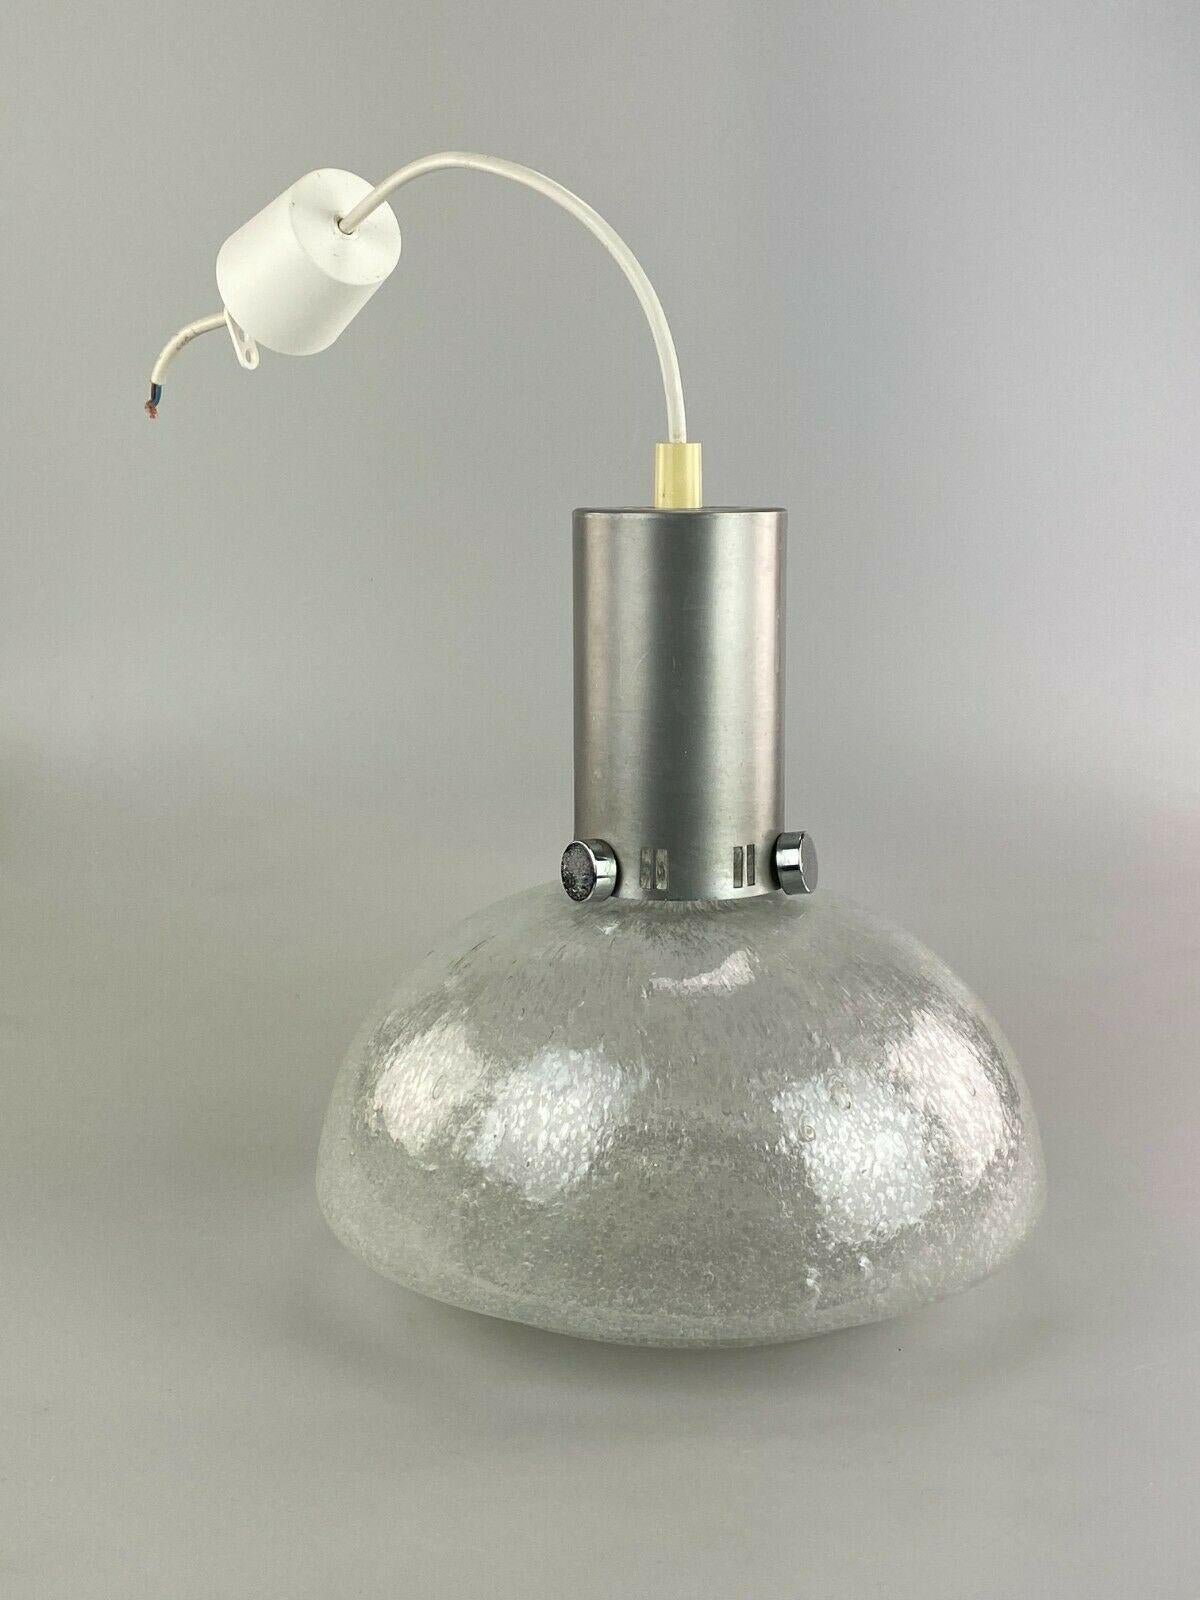 70s Lamp Lamp Ball Lamp Hanging Lamp Glass Ceiling Lamp Space Age Design For Sale 4